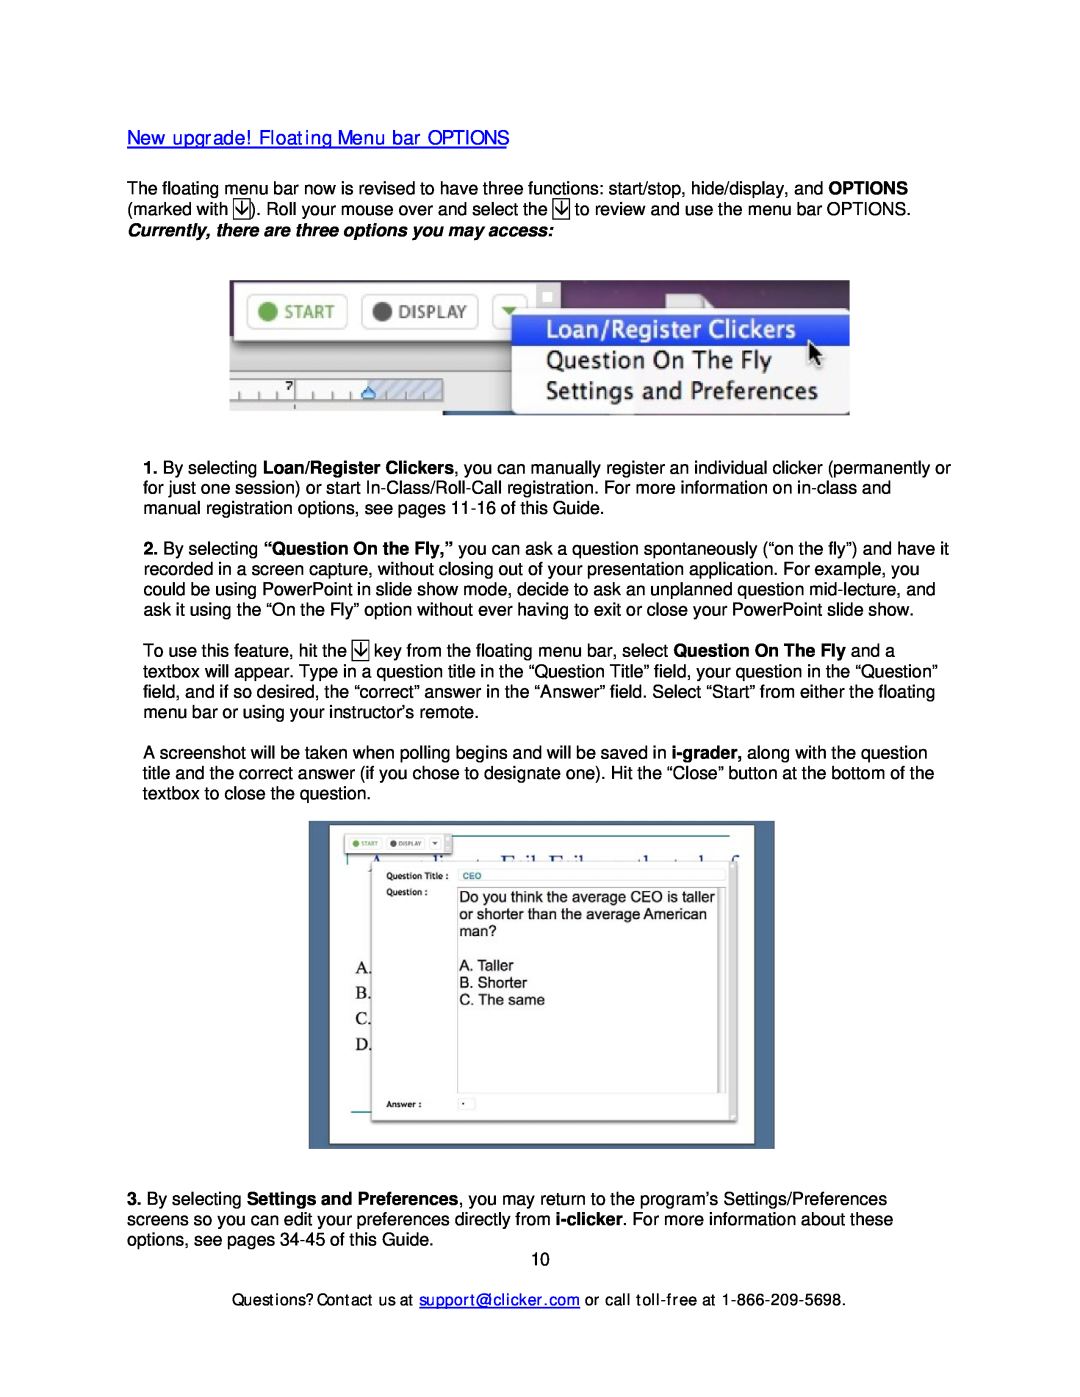 Apple Mouse manual New upgrade! Floating Menu bar OPTIONS, Currently, there are three options you may access 